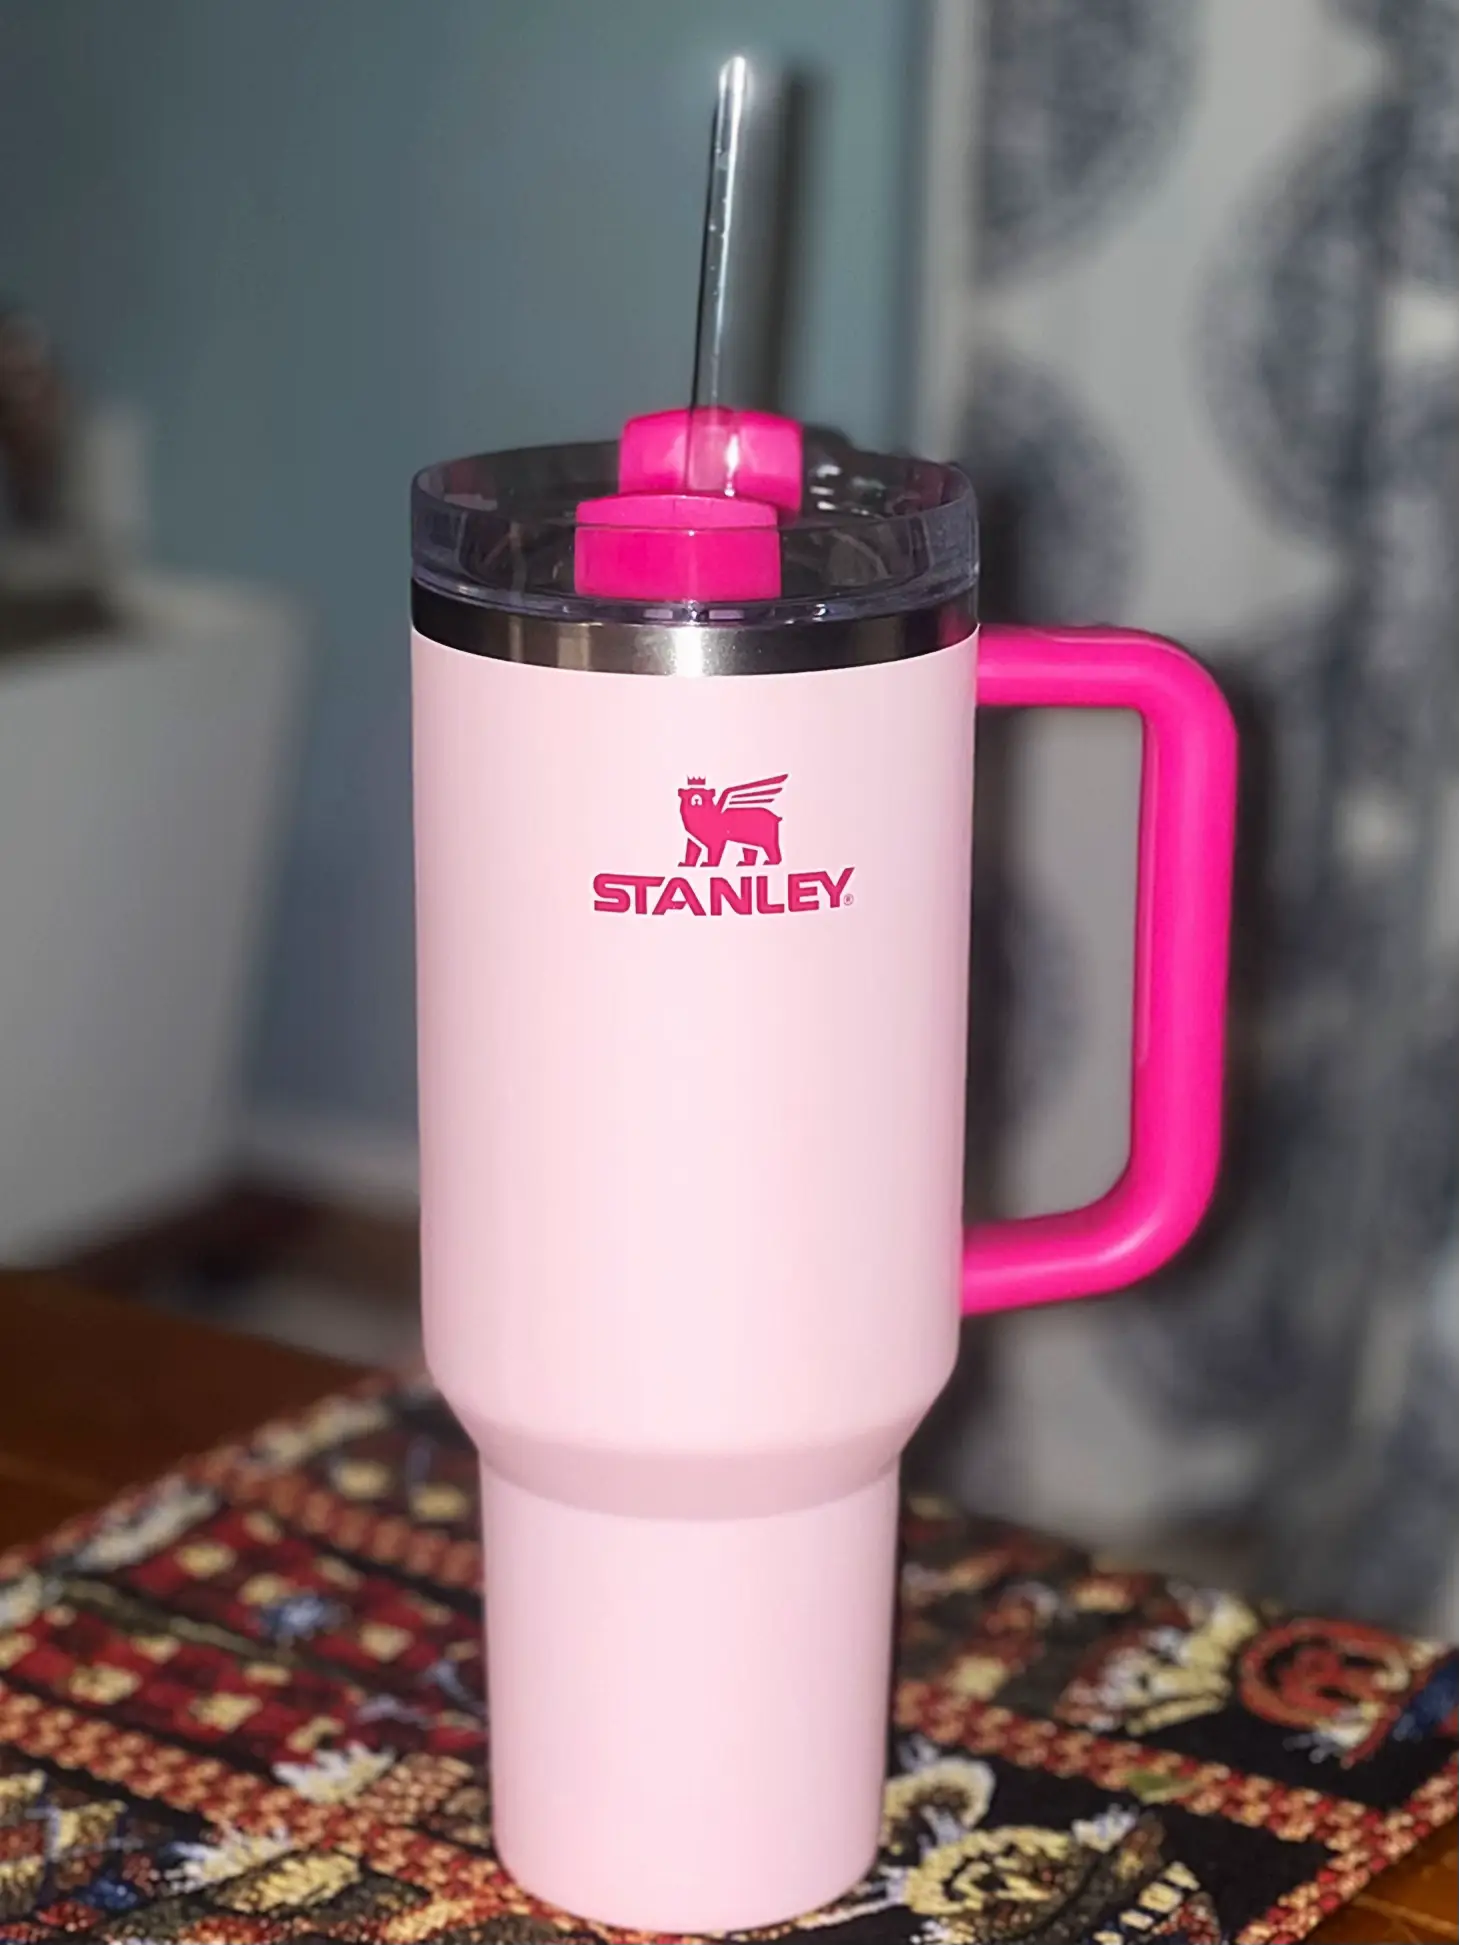 Stanley - A Quencher for every shade of you! Available now at Target.com  and arriving in most Target stores 12/26, the 30 oz Adventure Quencher in 8  new exclusive colors just for